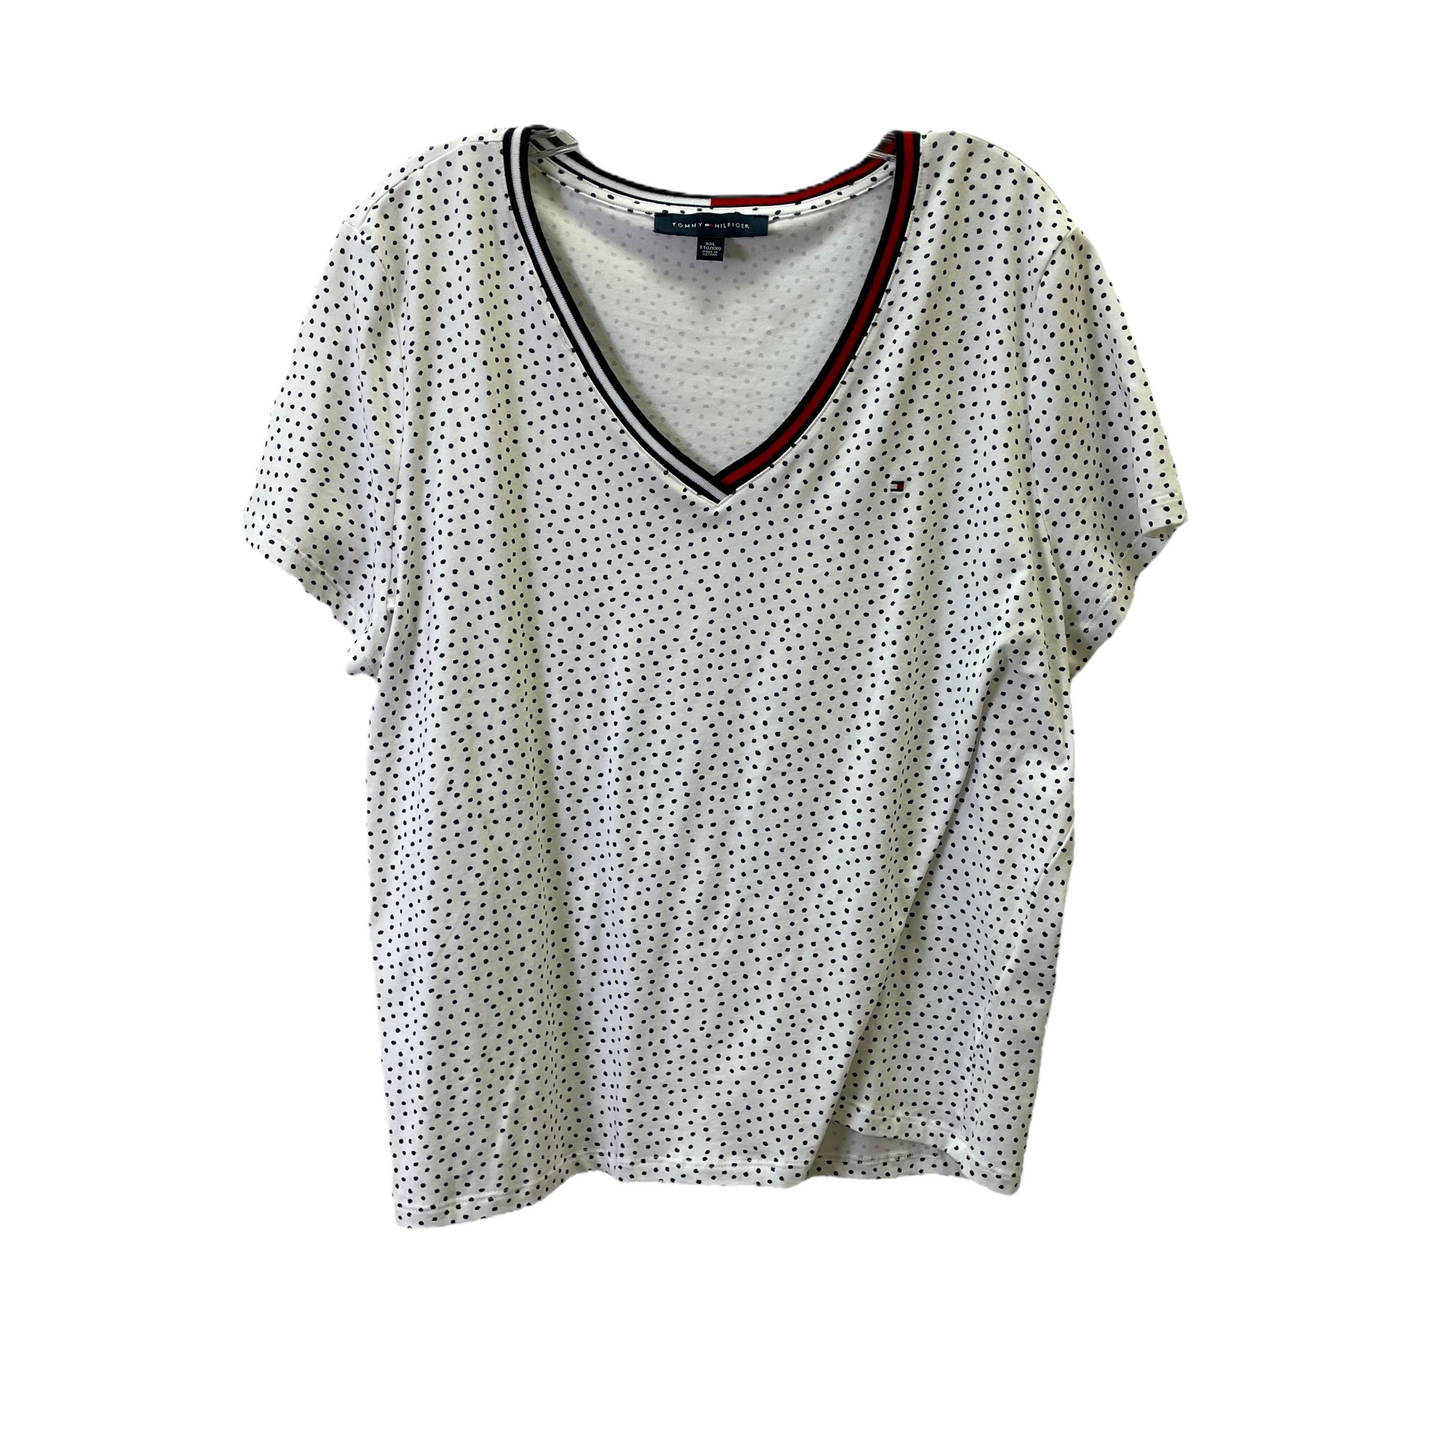 White Top Short Sleeve Basic By Tommy Hilfiger, Size: 1x